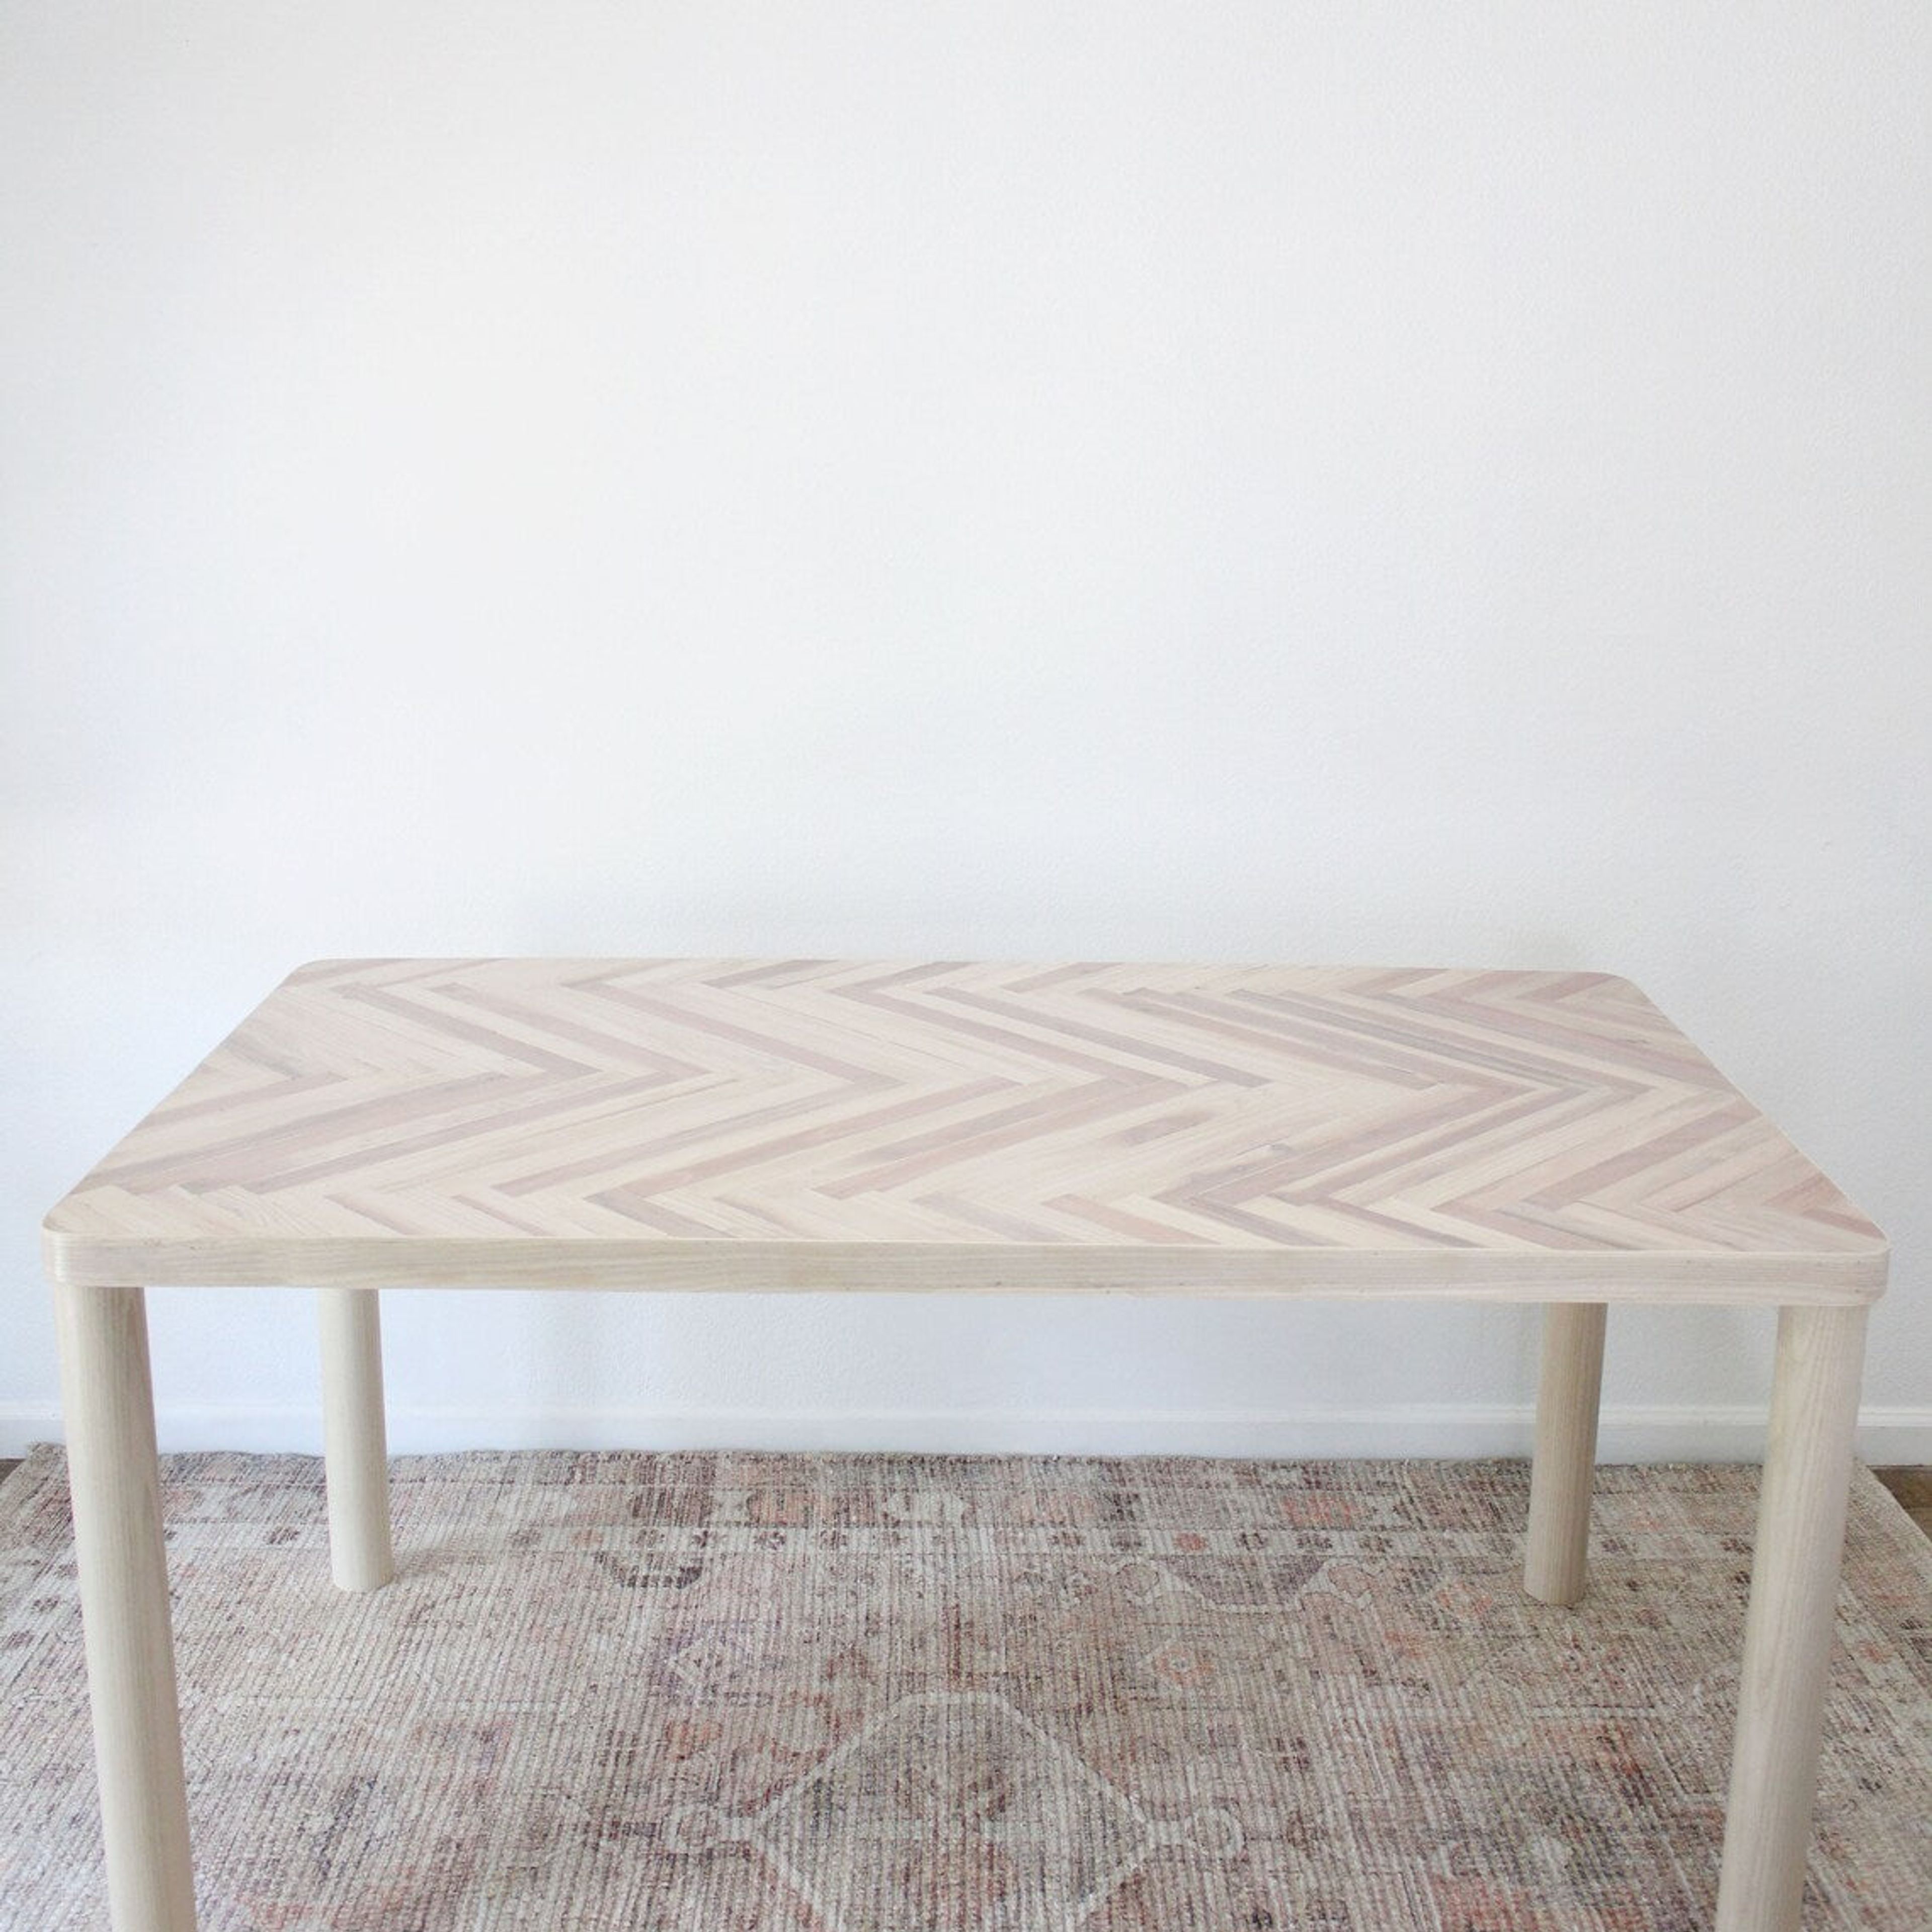 Rounded Lath Wood Herringbone Dining Table with Round Solid Ash Wood Legs